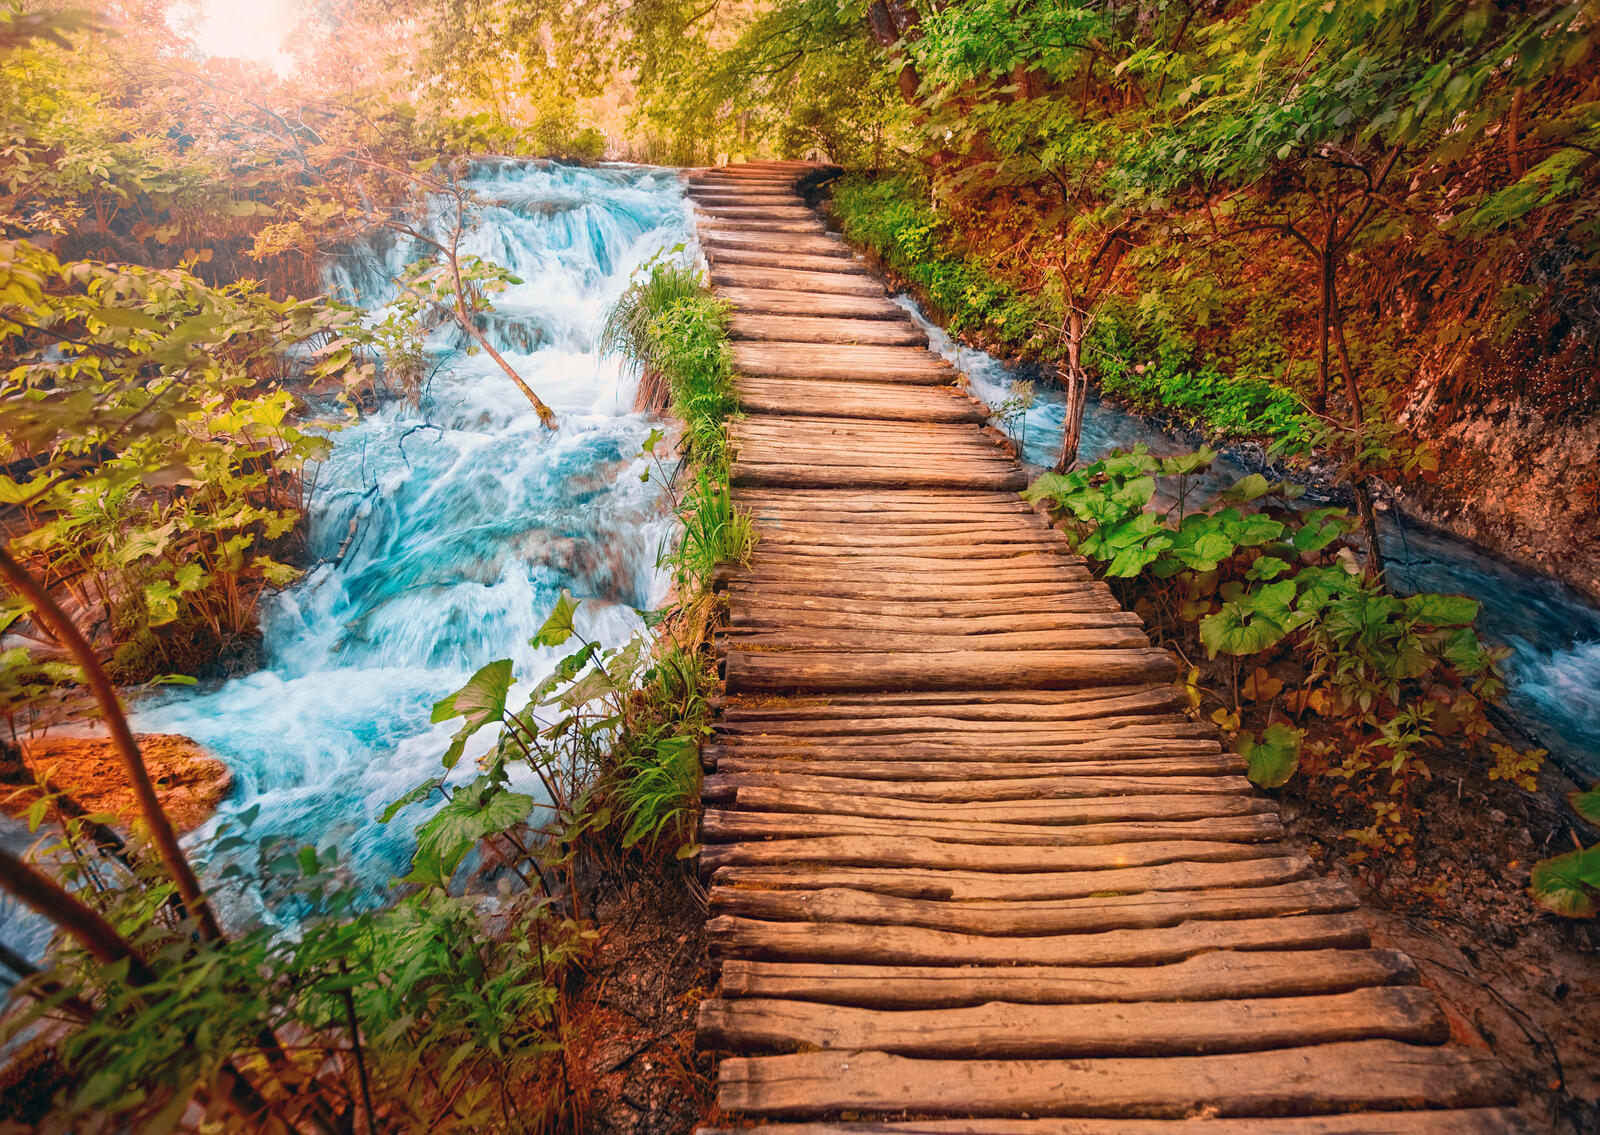 Wallpapers wood flooring river Plitvice Lakes National Park on the desktop